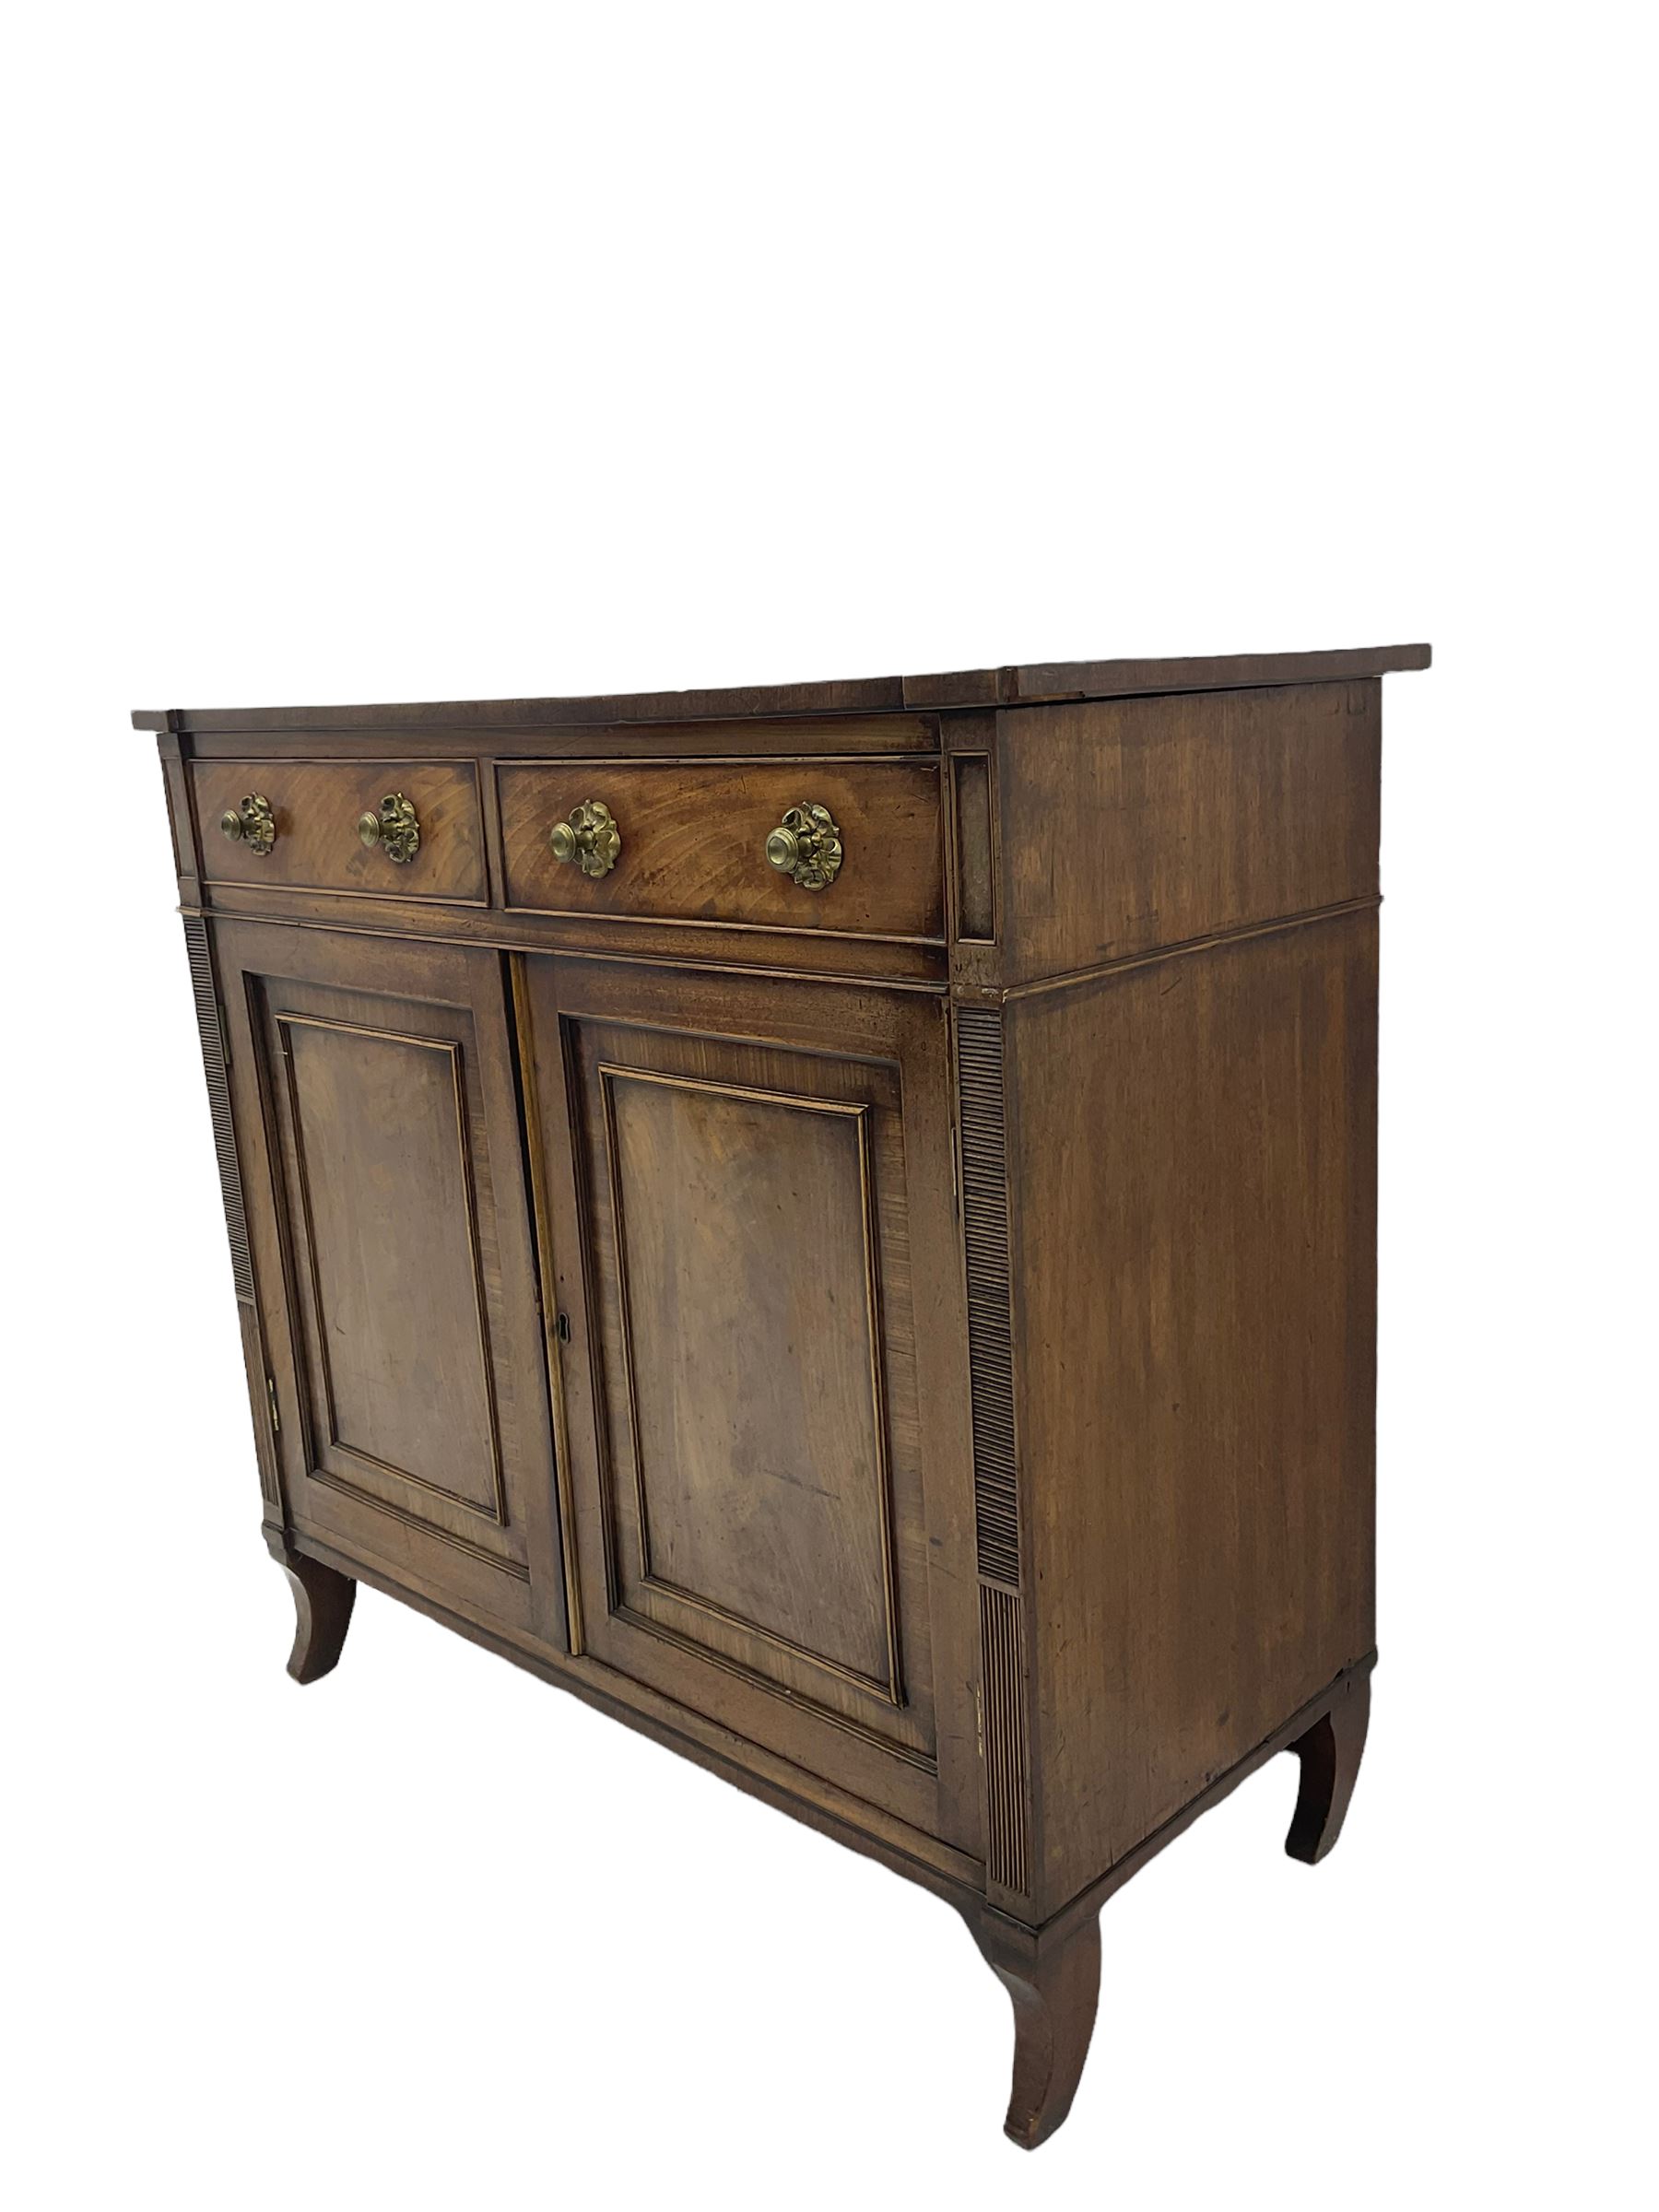 Regency period mahogany side cabinet - Image 4 of 10